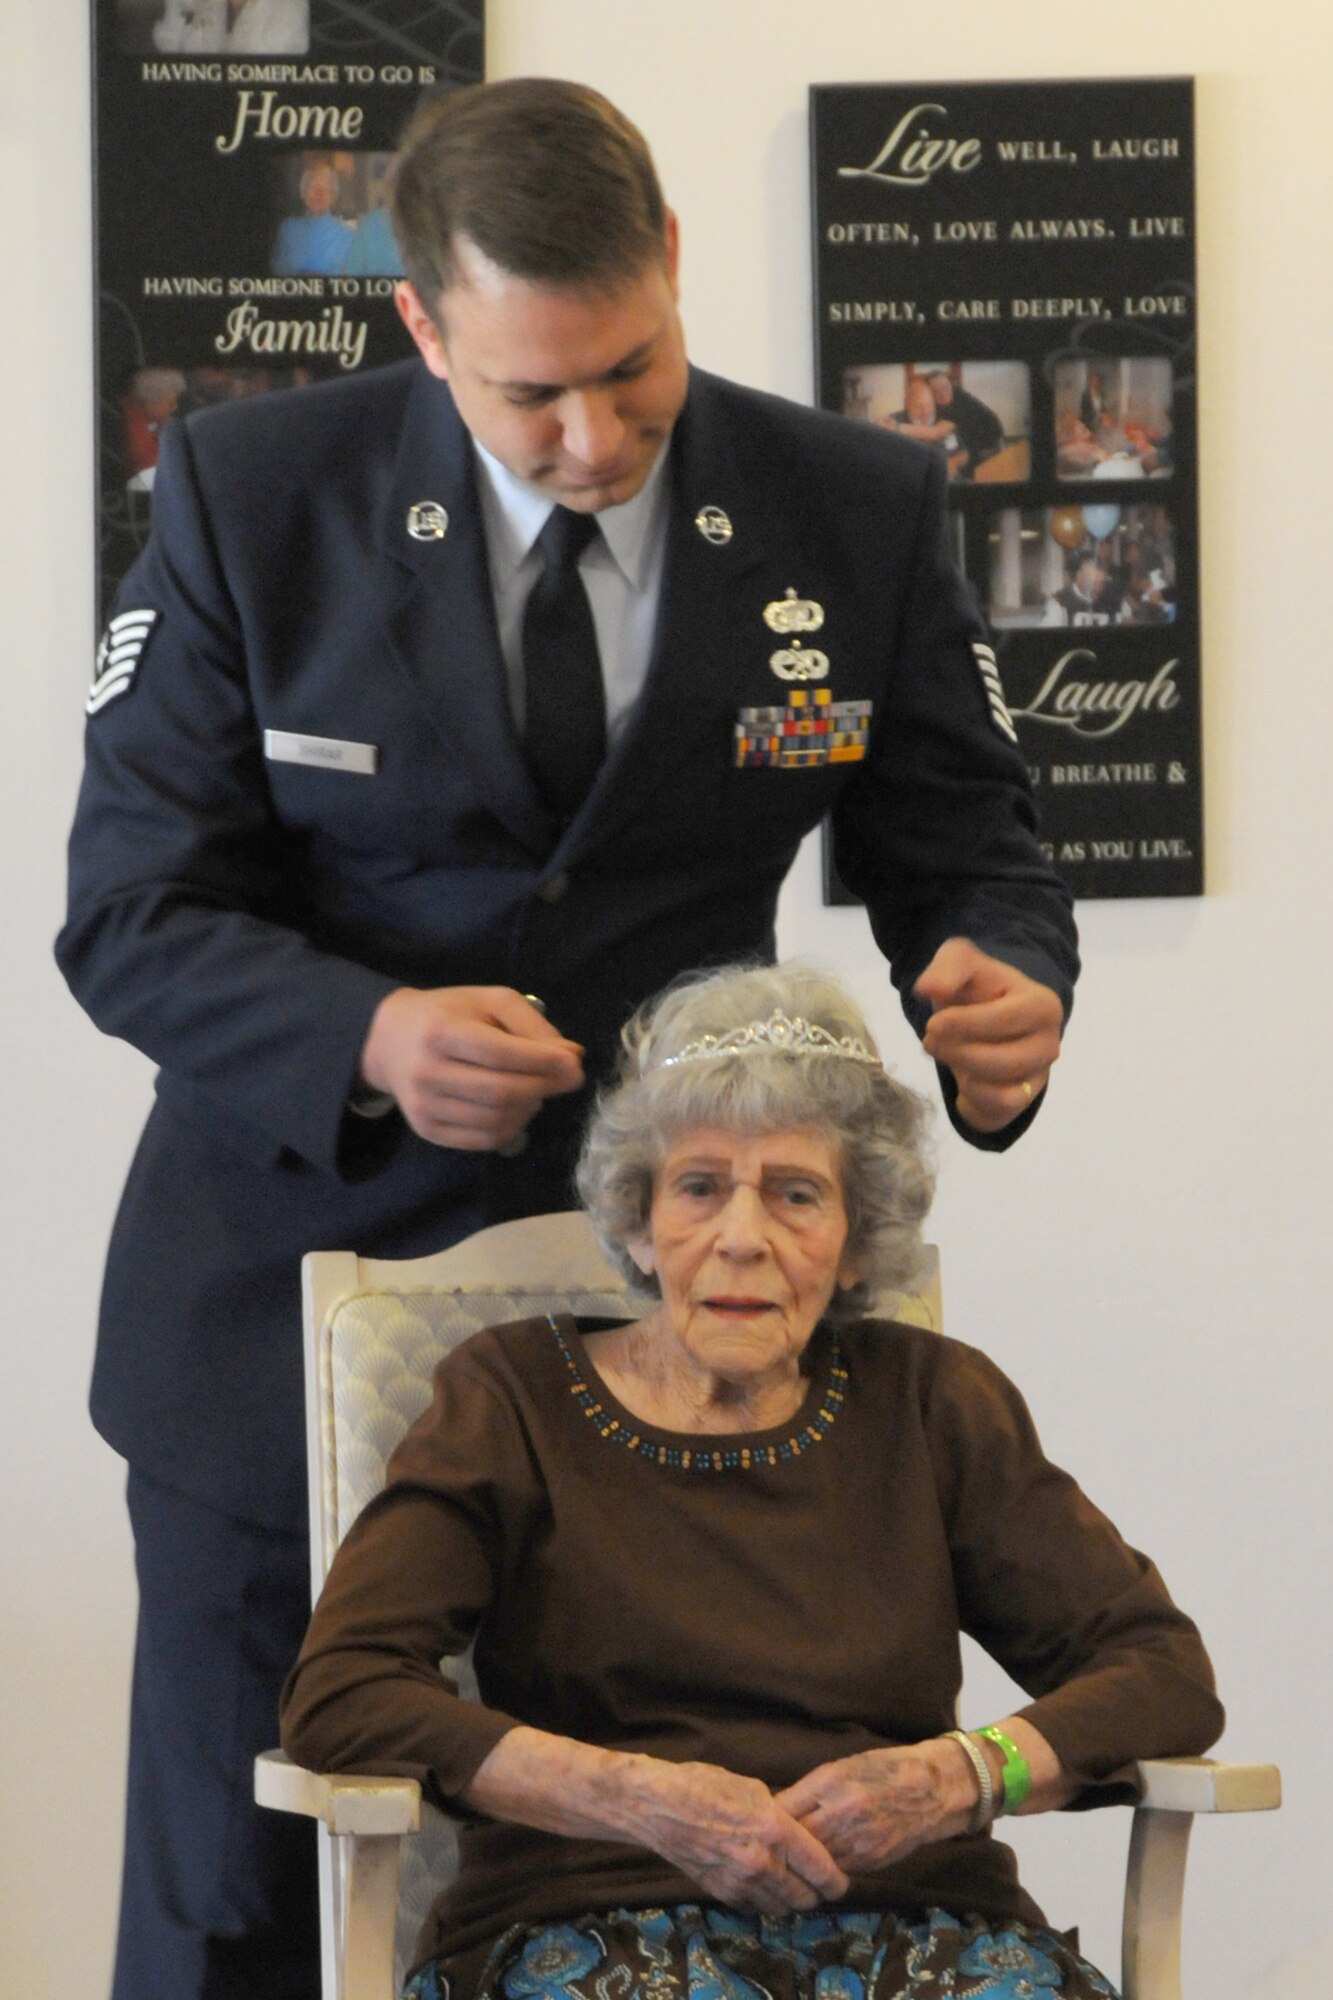 Tech. Sgt. Michael Shirar, 173rd Fighter Wing Maintenace Training Manager, places a tiara onMrs. Irene Dalton, the 2011 Rose Queen Princess, head during the ceremony.  Members of the Oregon Air National Guard volunteered to help with the 2011 Rose Queen Corenation ceremony at Plum Ridge Marquis Care in Klamath Falls, Ore. April 8, 2011. (U.S. Air Force Photo by Tech.Sgt. Jennifer Shirar, RELEASED)